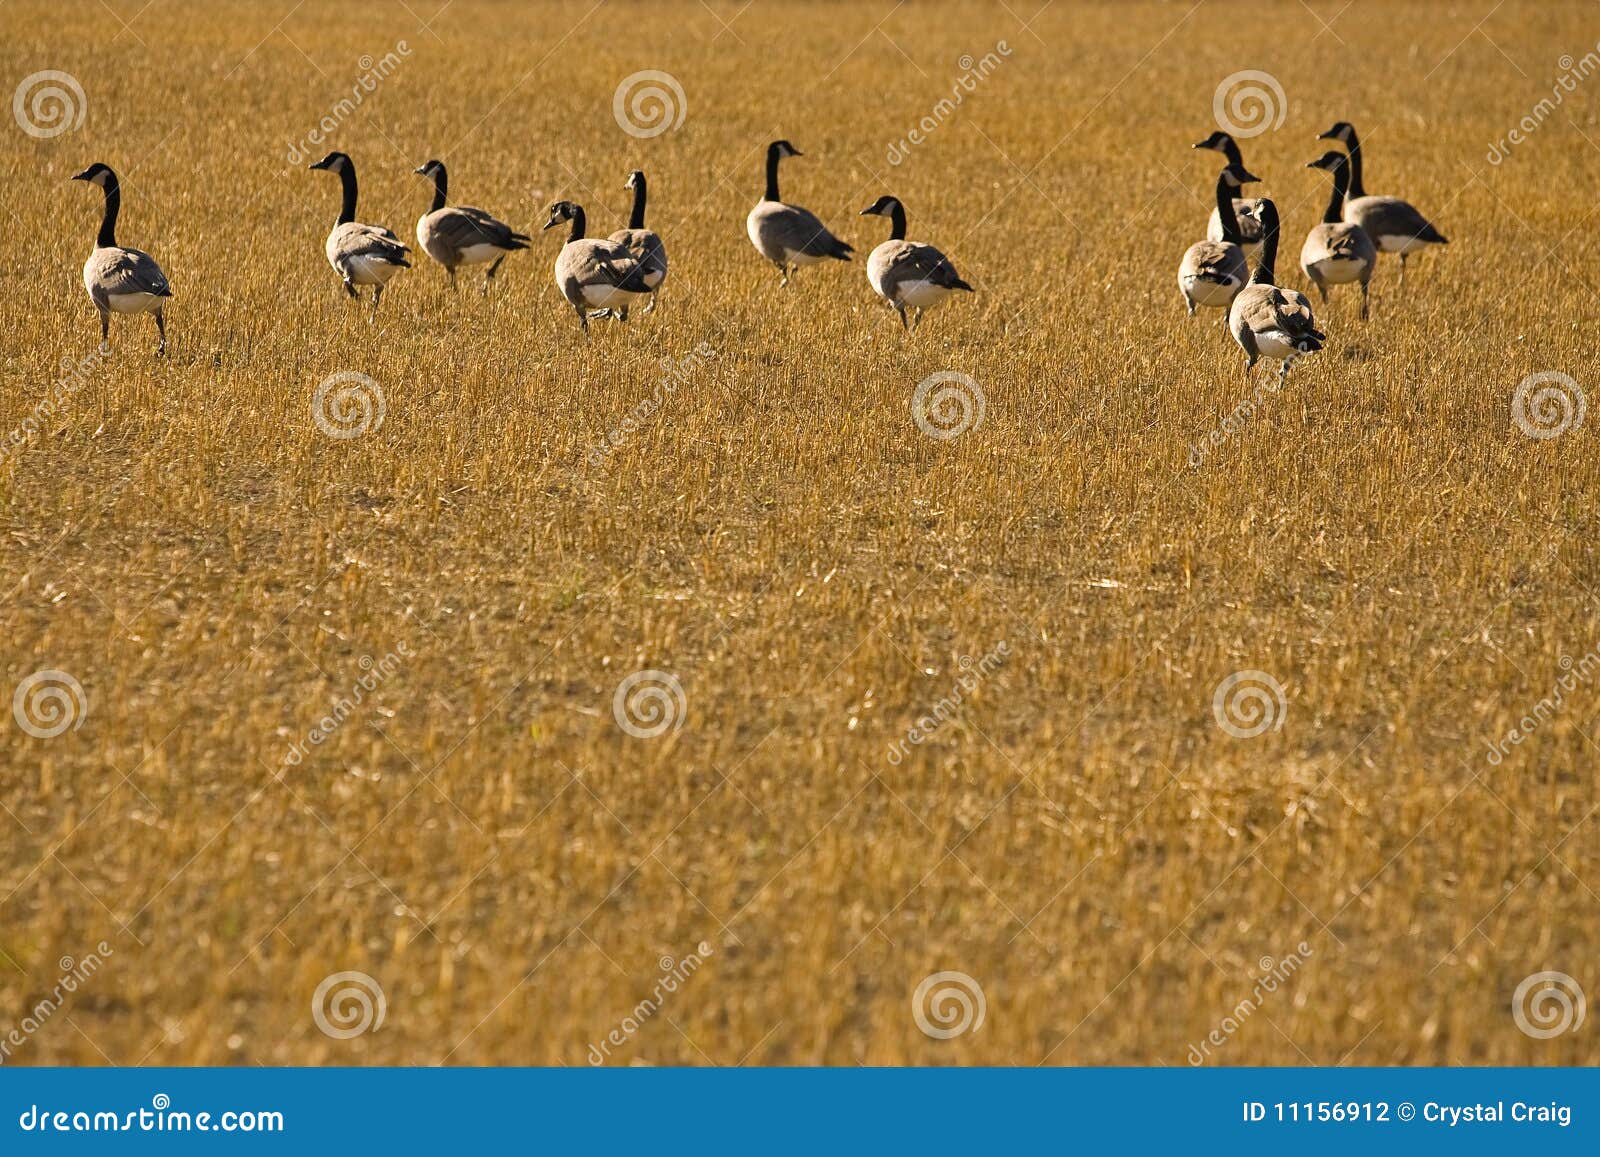 flock of canadian geese in harvested field